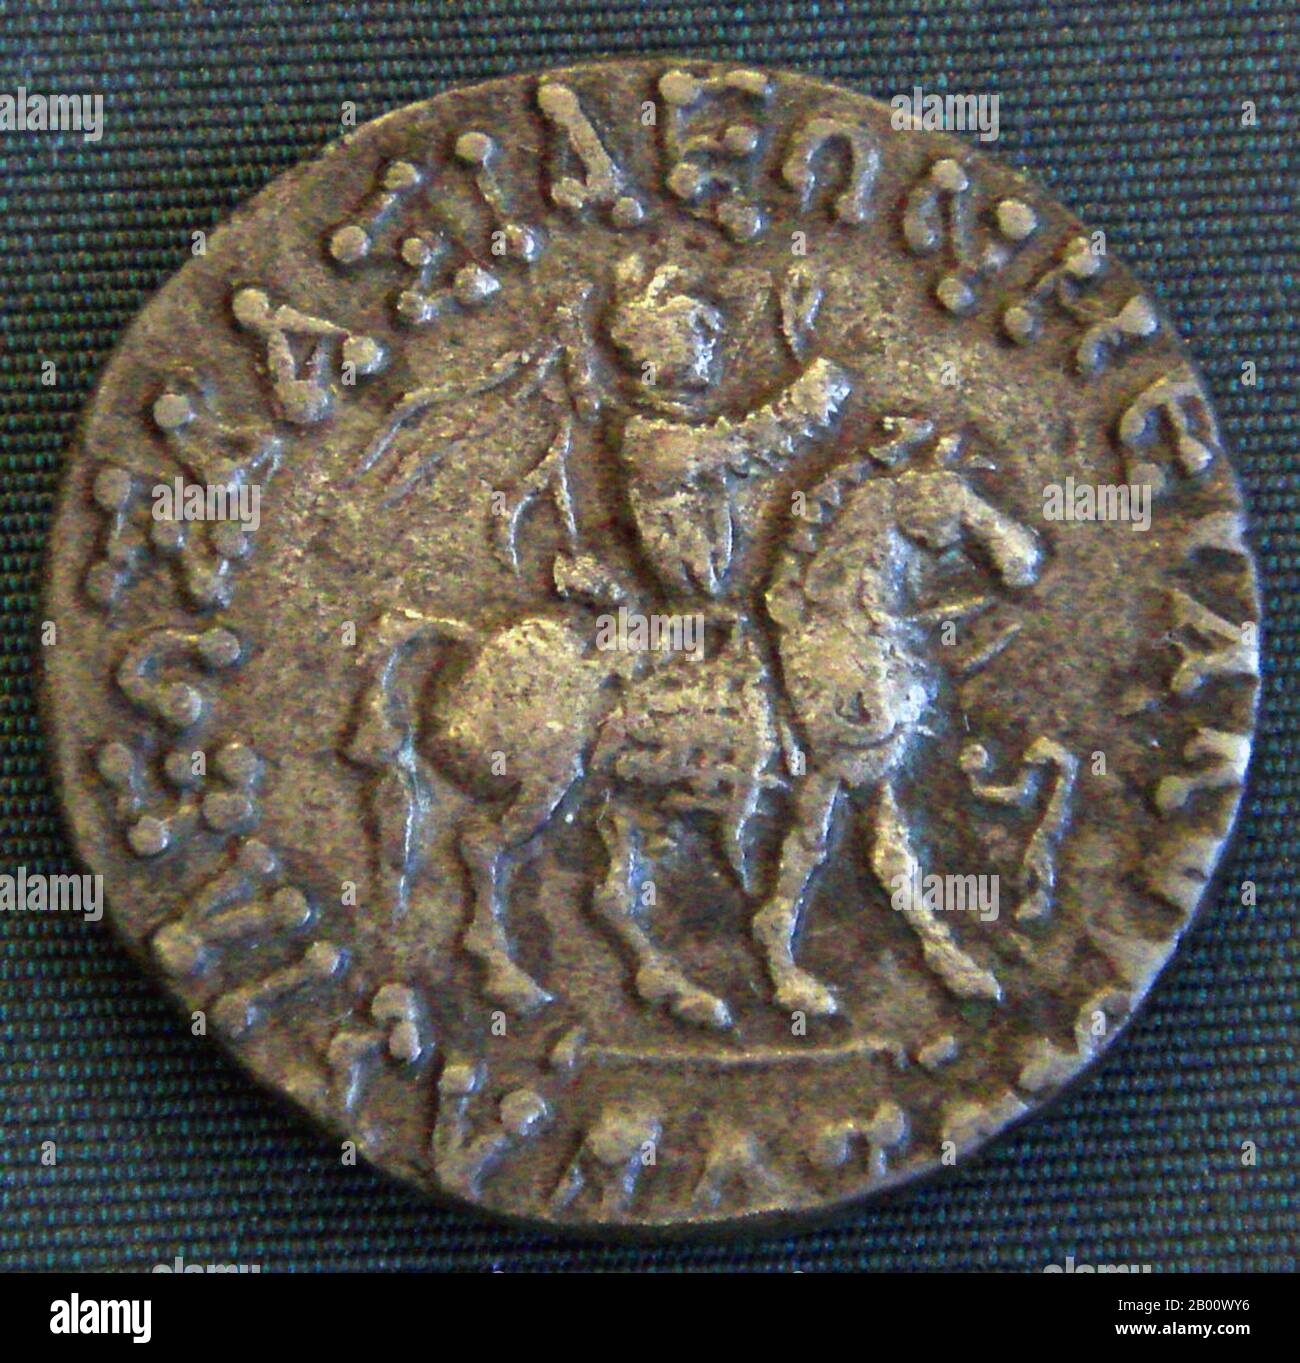 India: Coin of Azes II, with a clear depiction of his military outfit, with coat of mail and reflex bow in the saddle. Photo by PHGCOM (CC BY-SA 3.0 License).  Azes II (reigned circa 35-12 BCE), may have been the last Indo-Scythian king in northern India. After the death of Azes II, the rule of the Indo-Scythians in northwestern India finally crumbled with the conquest of the Kushans, one of the five tribes of the Yuezhi who had lived in Bactria for more than a century, and who were then expanding into India to create a Kushan Empire. Stock Photo